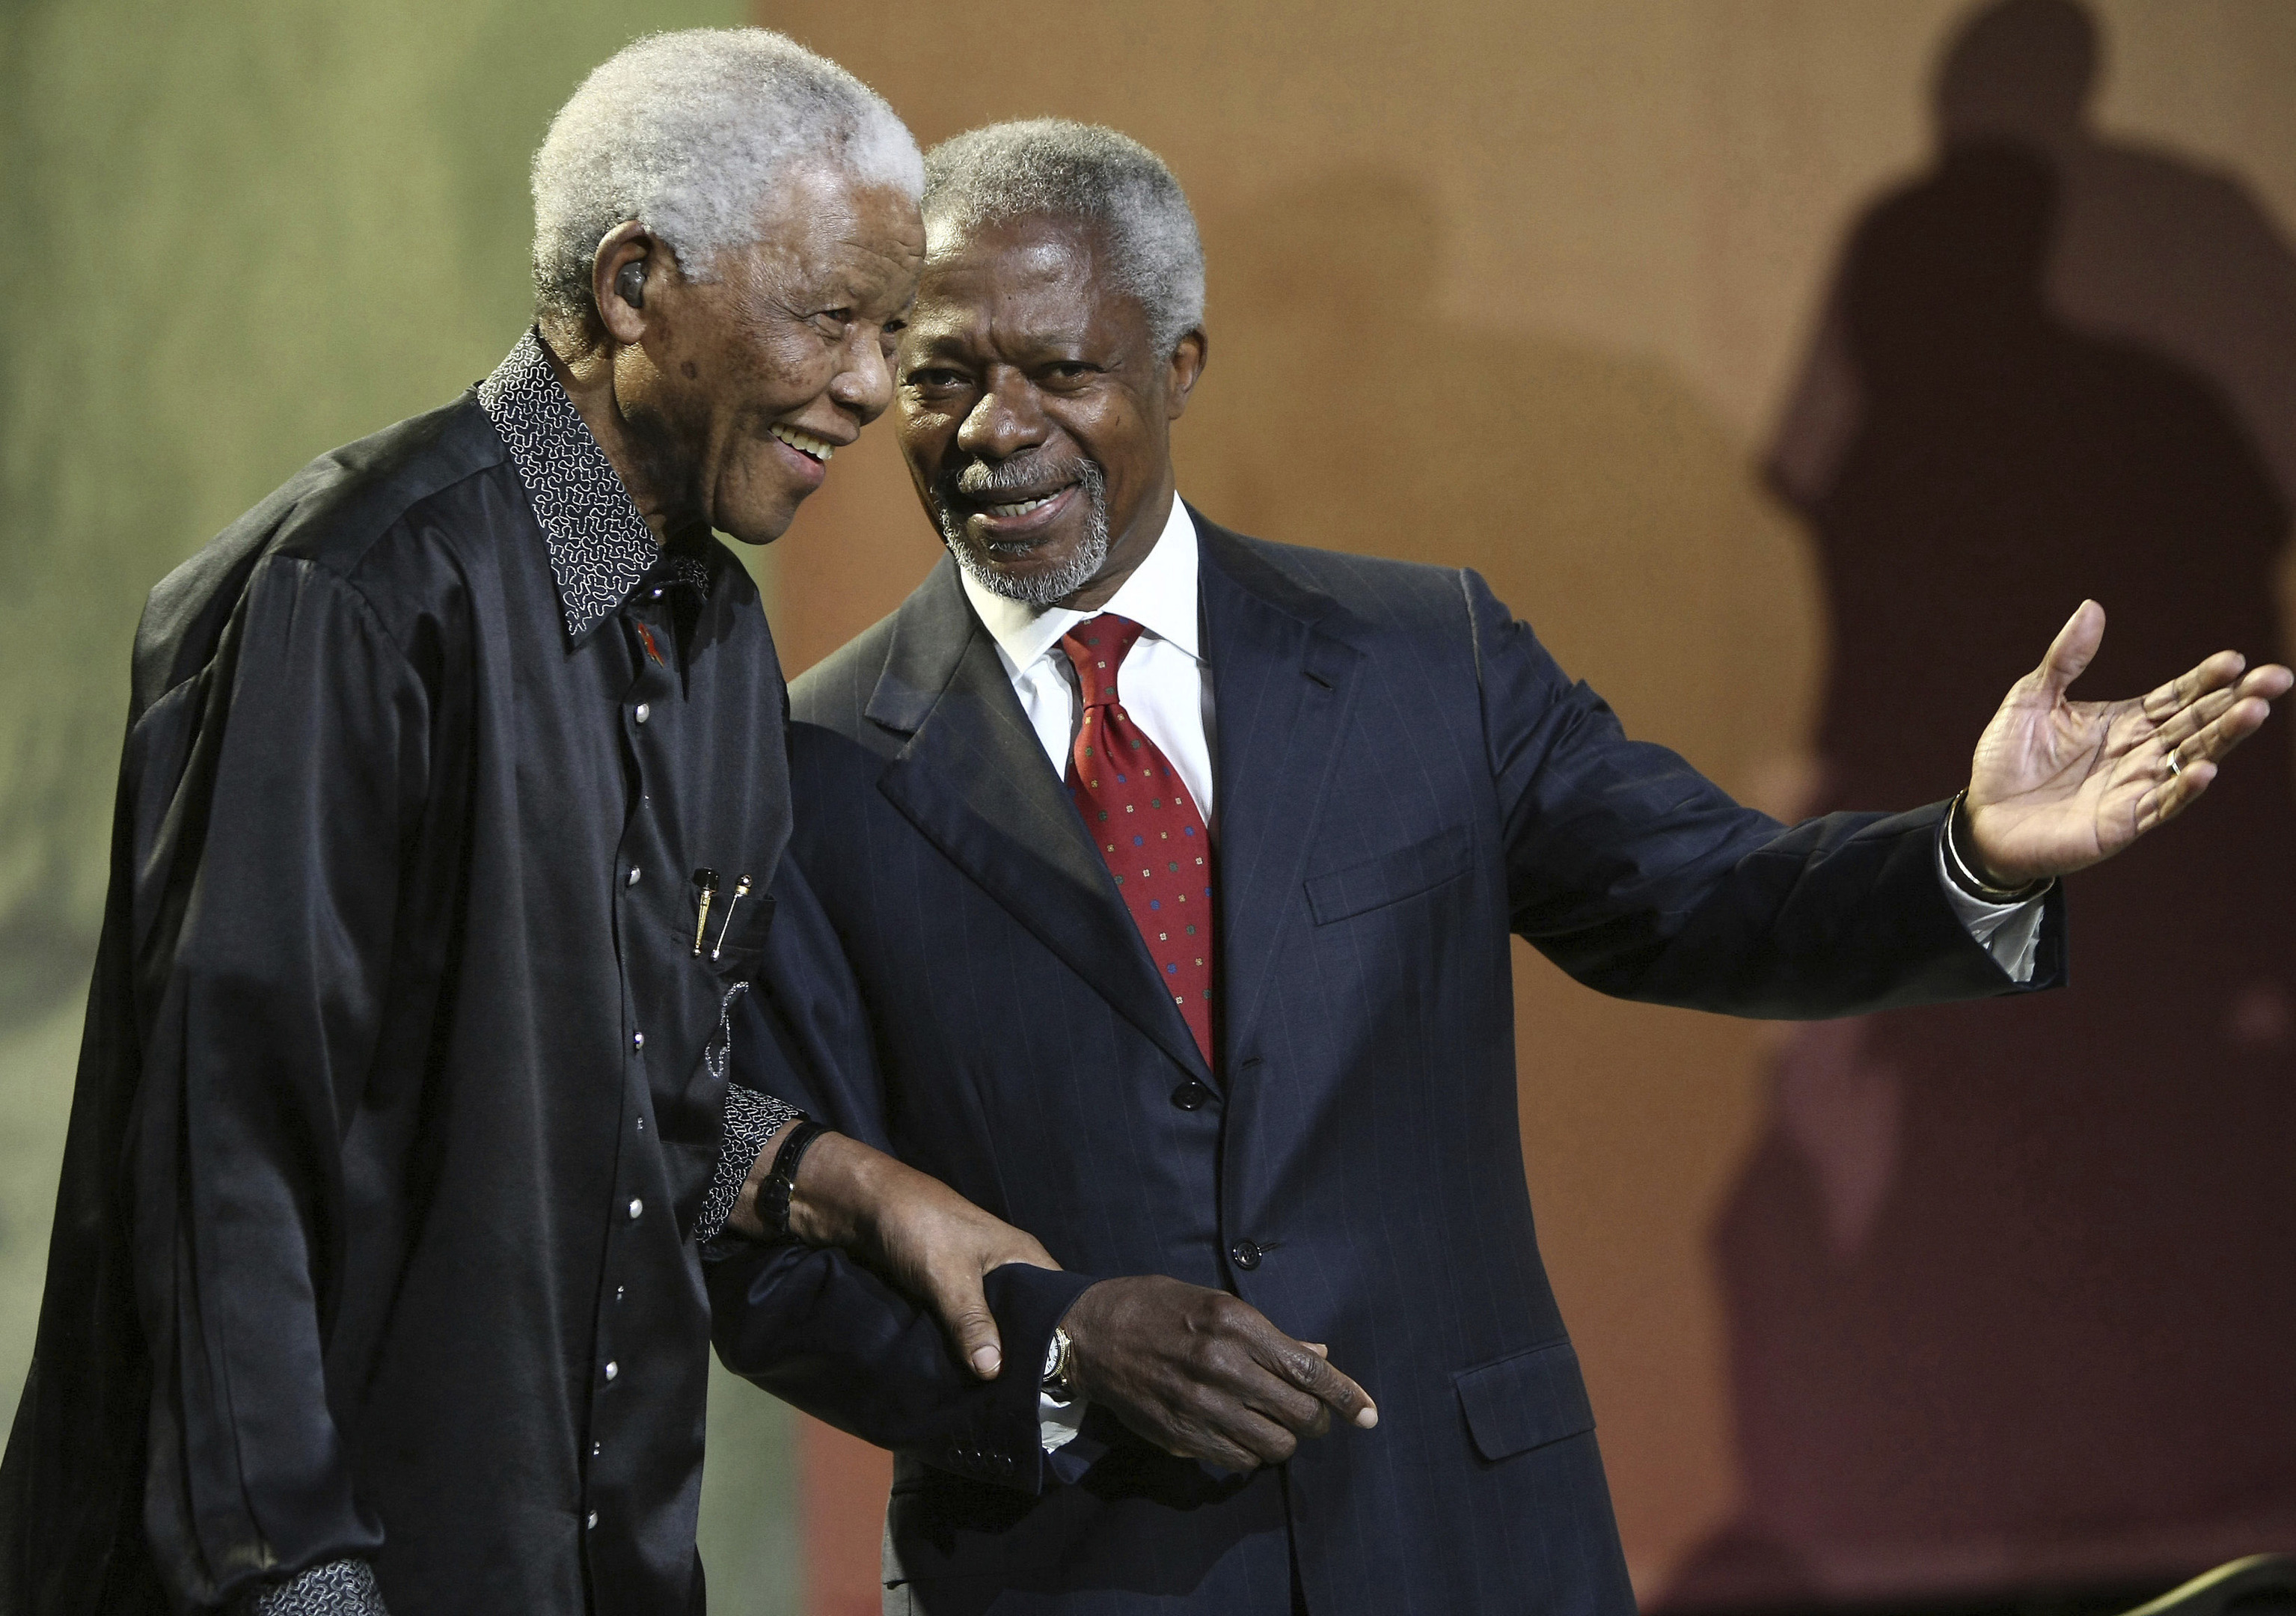 Nelson Mandela and former United Nations Secretary General Kofi Annan arrive together at the 5th Nelson Mandela Annual Lecture (AP Photo, File)